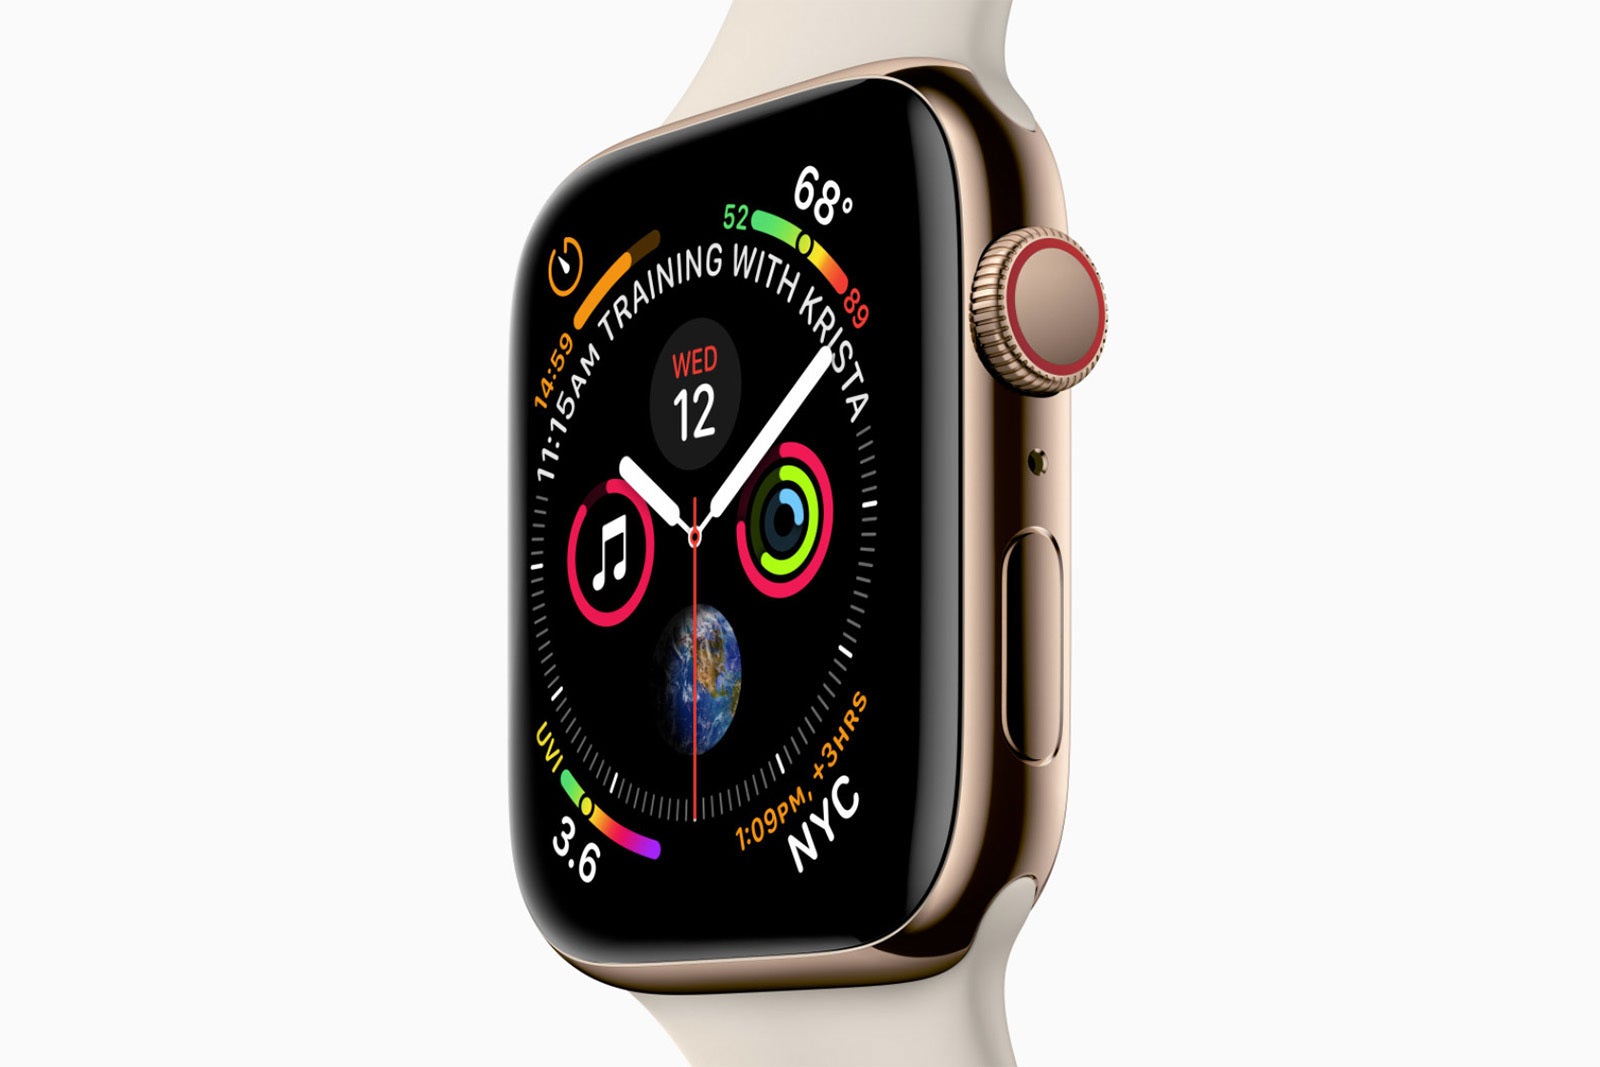 The Infograph watchface on the latest Apple Watches is packed with information. Your smartphone lockscreen? It can display the time and date... - We need a better smartphone lockscreen experience